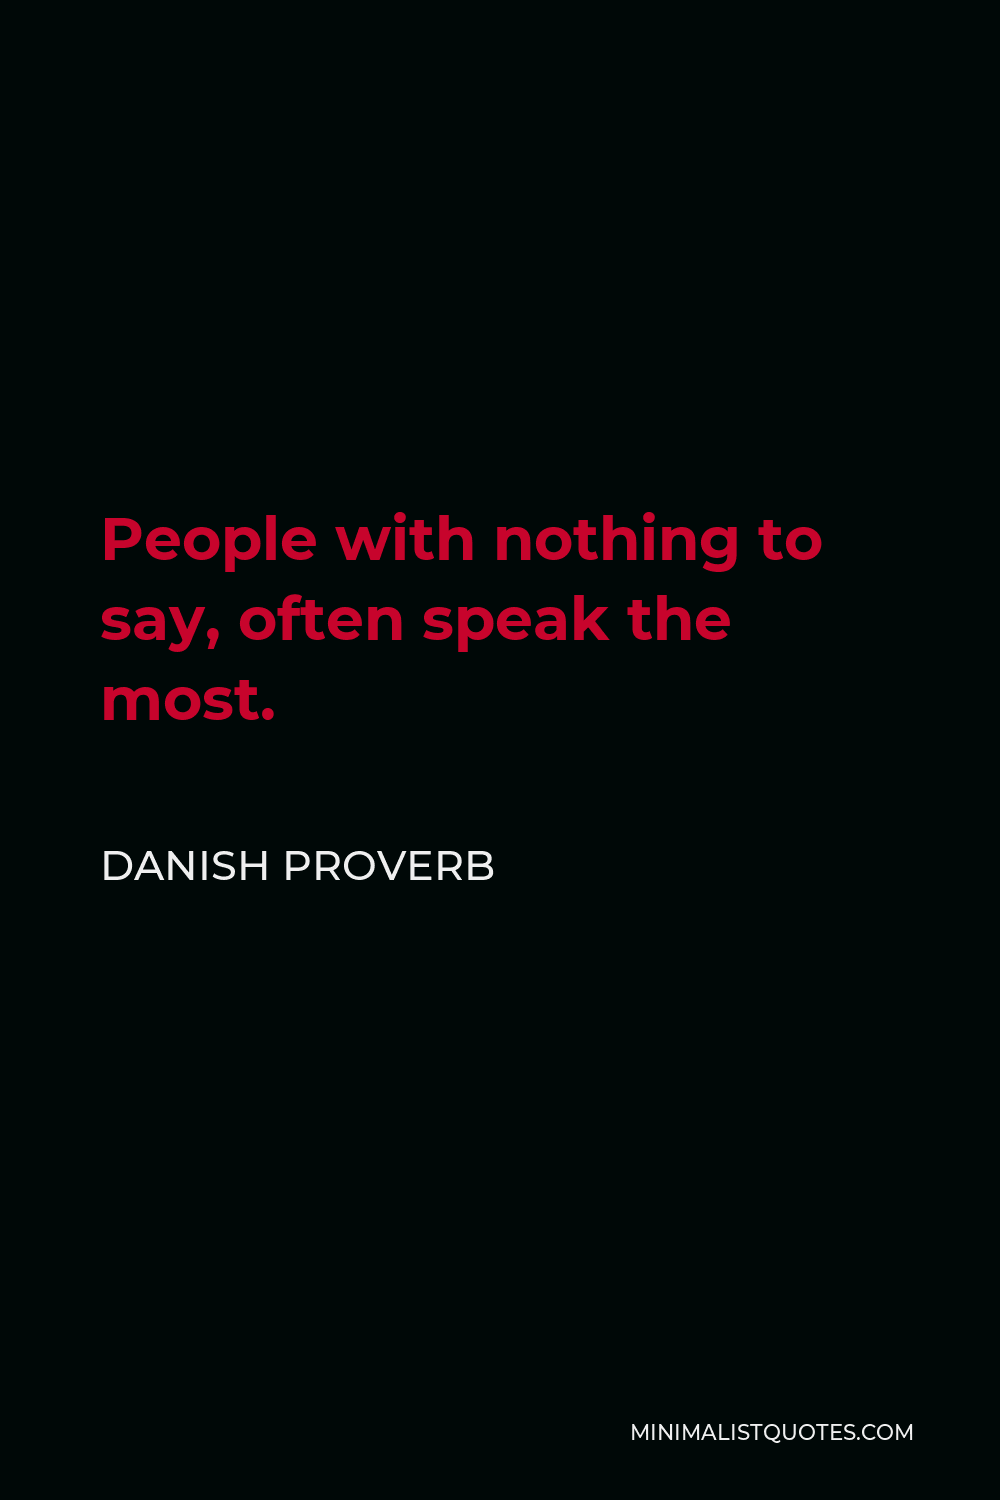 Danish Proverb Quote - People with nothing to say, often speak the most.